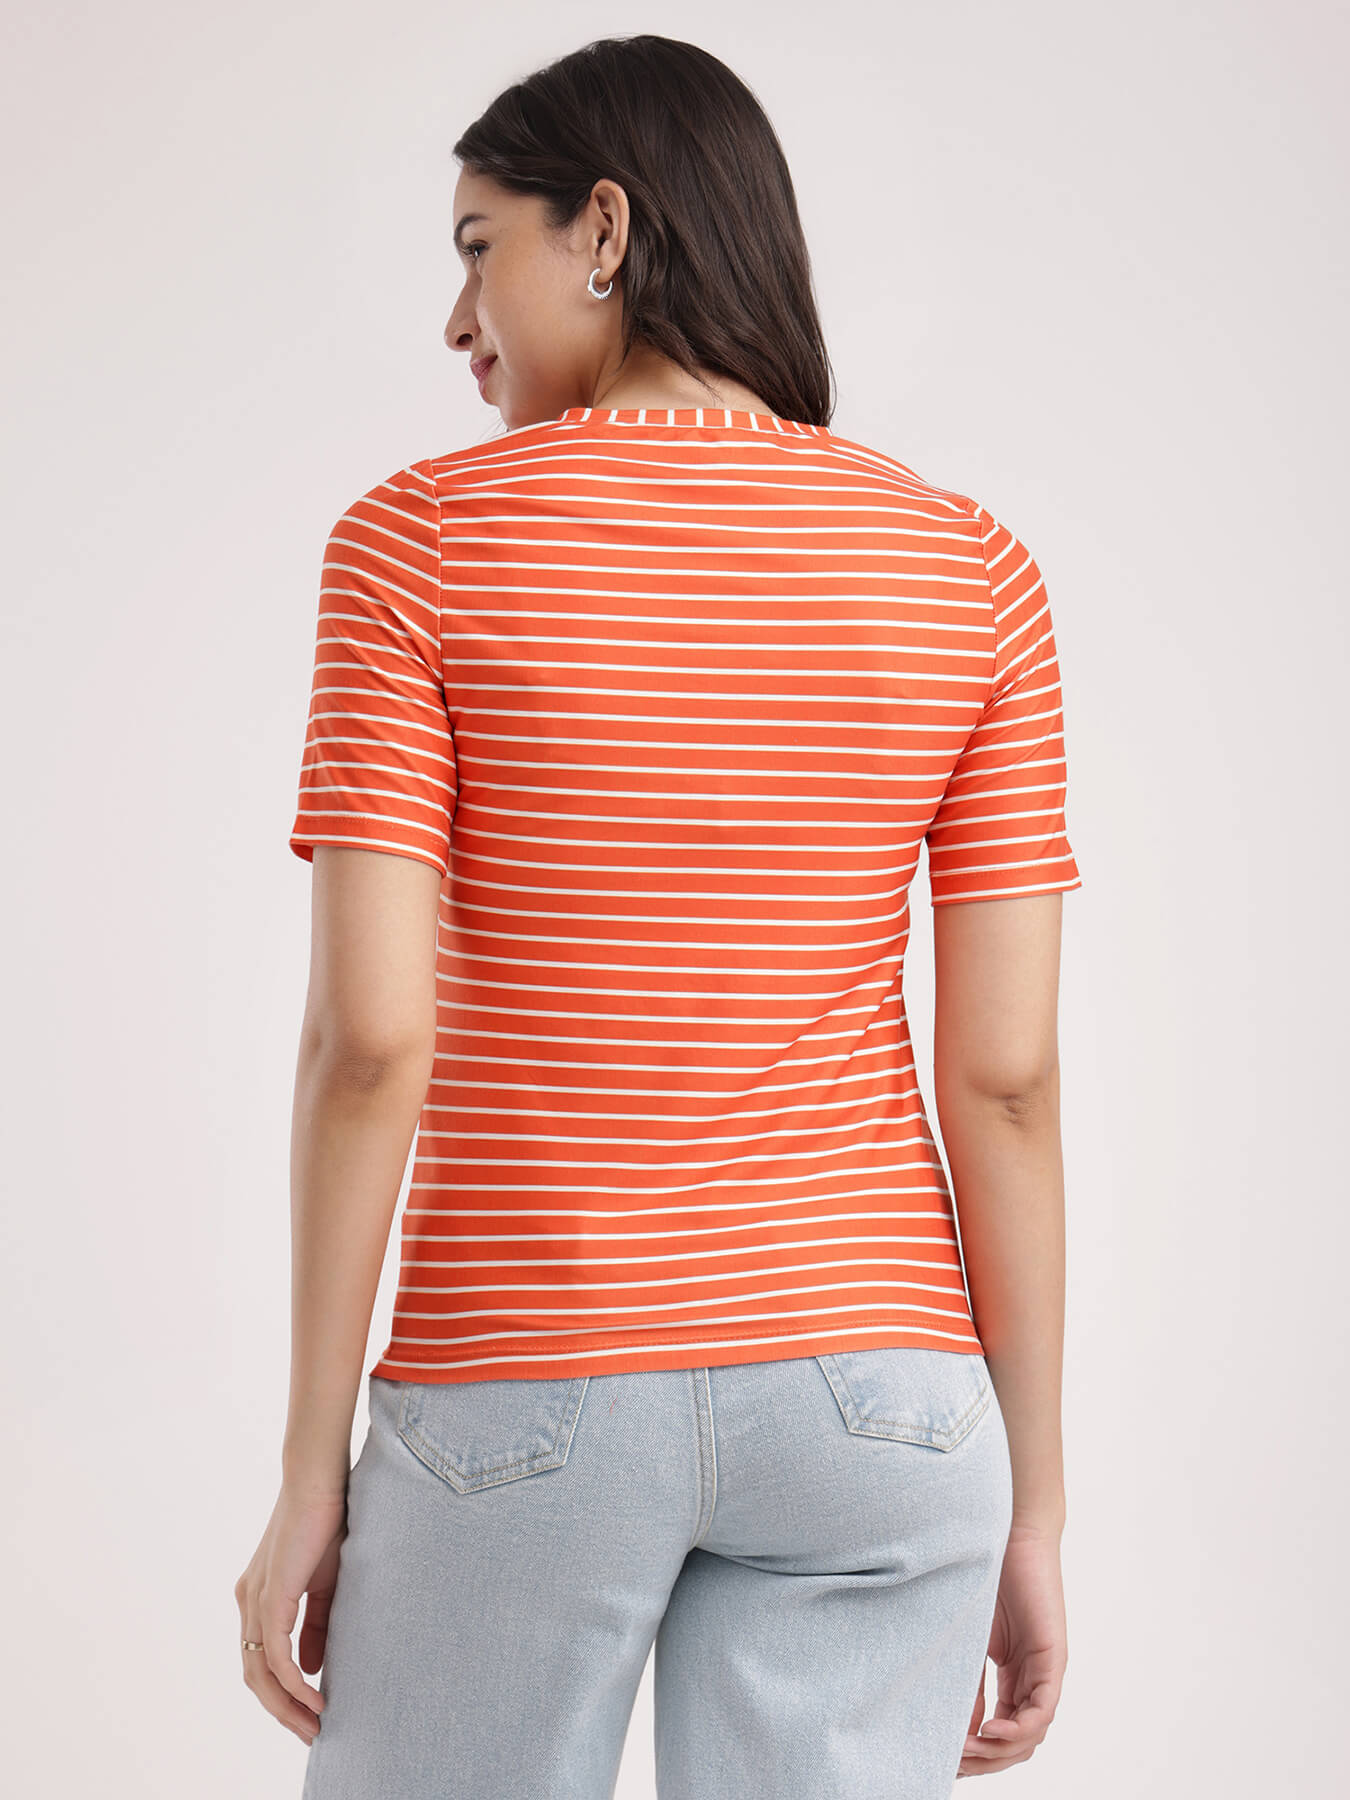 Striped Knitted T-Shirt - Orange And White